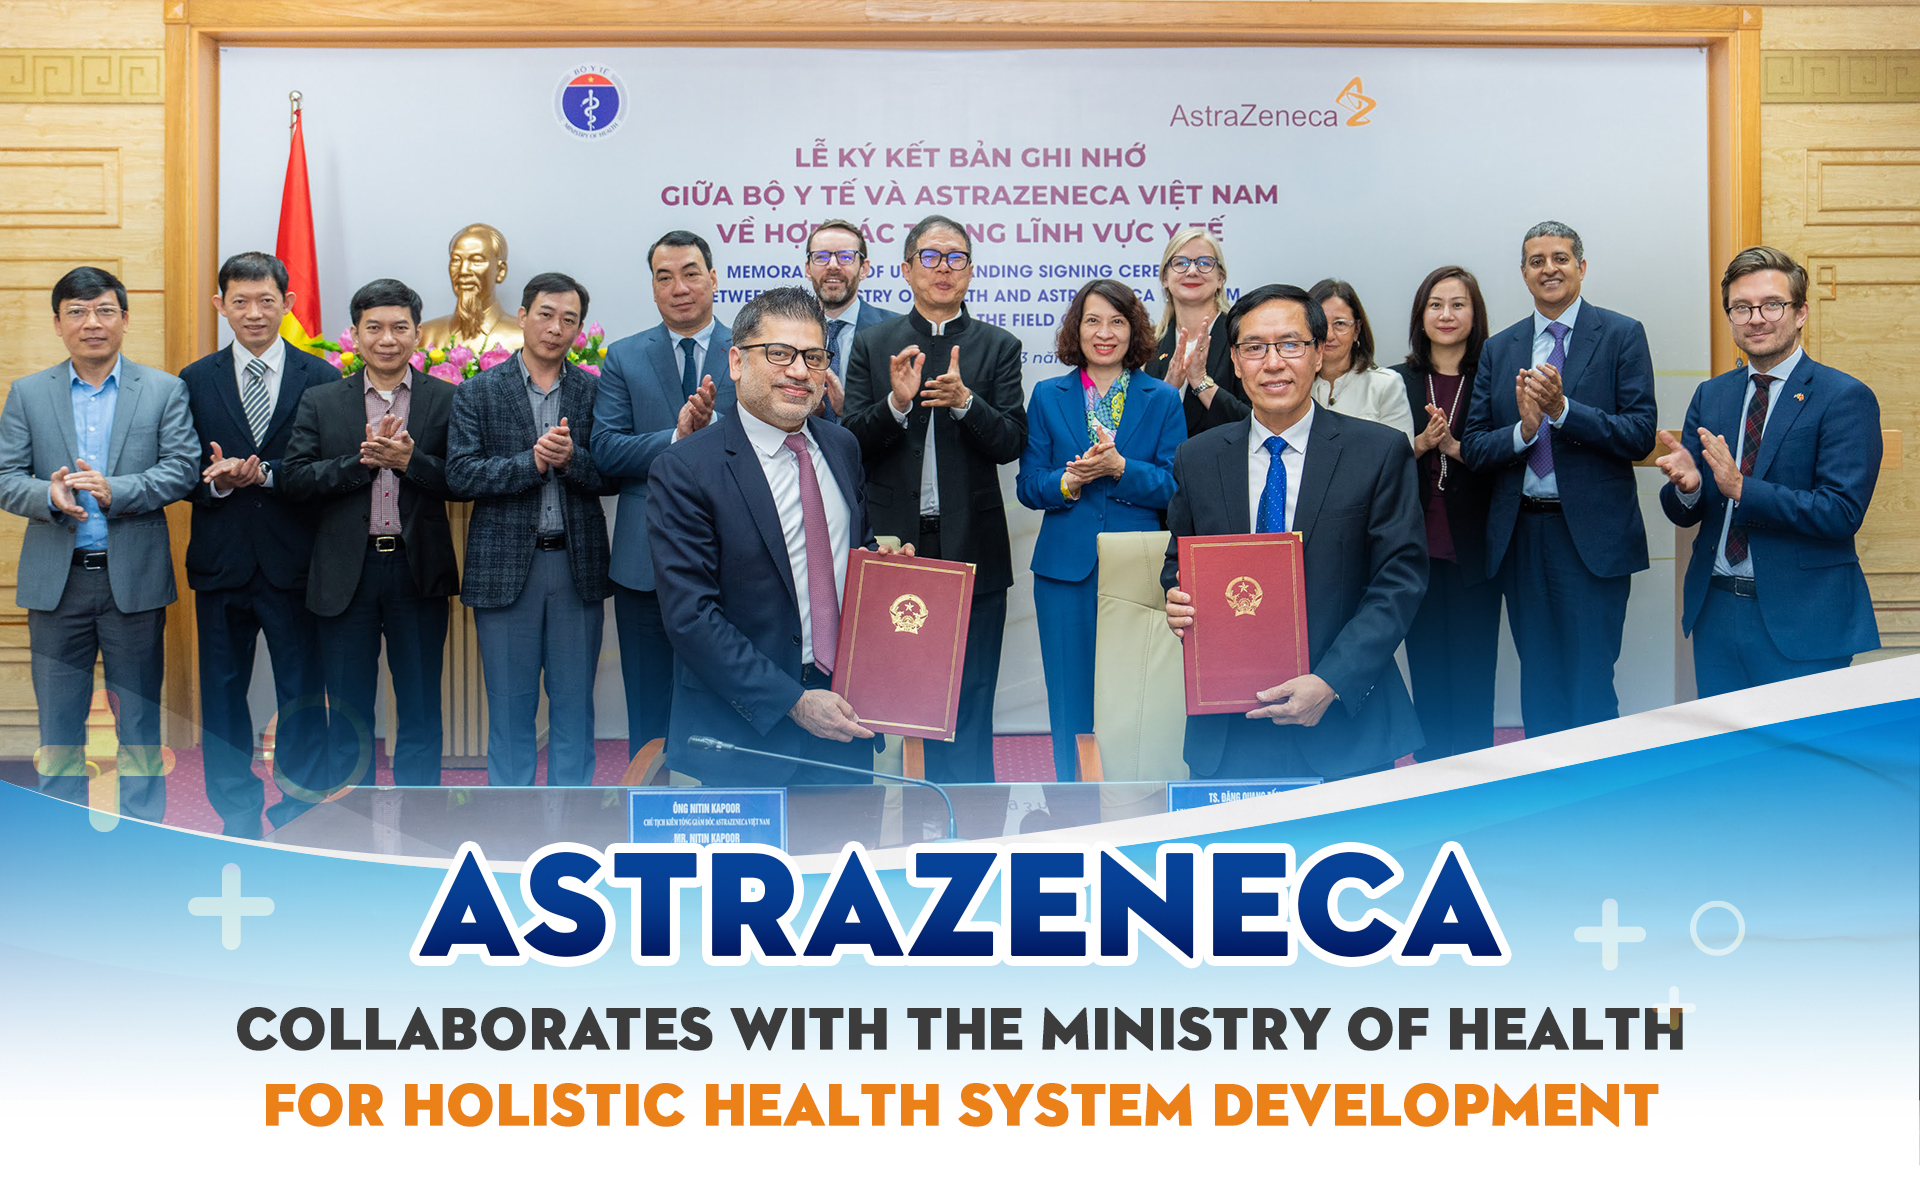 AstraZeneca collaborates with Vietnam's health ministry for holistic health system development